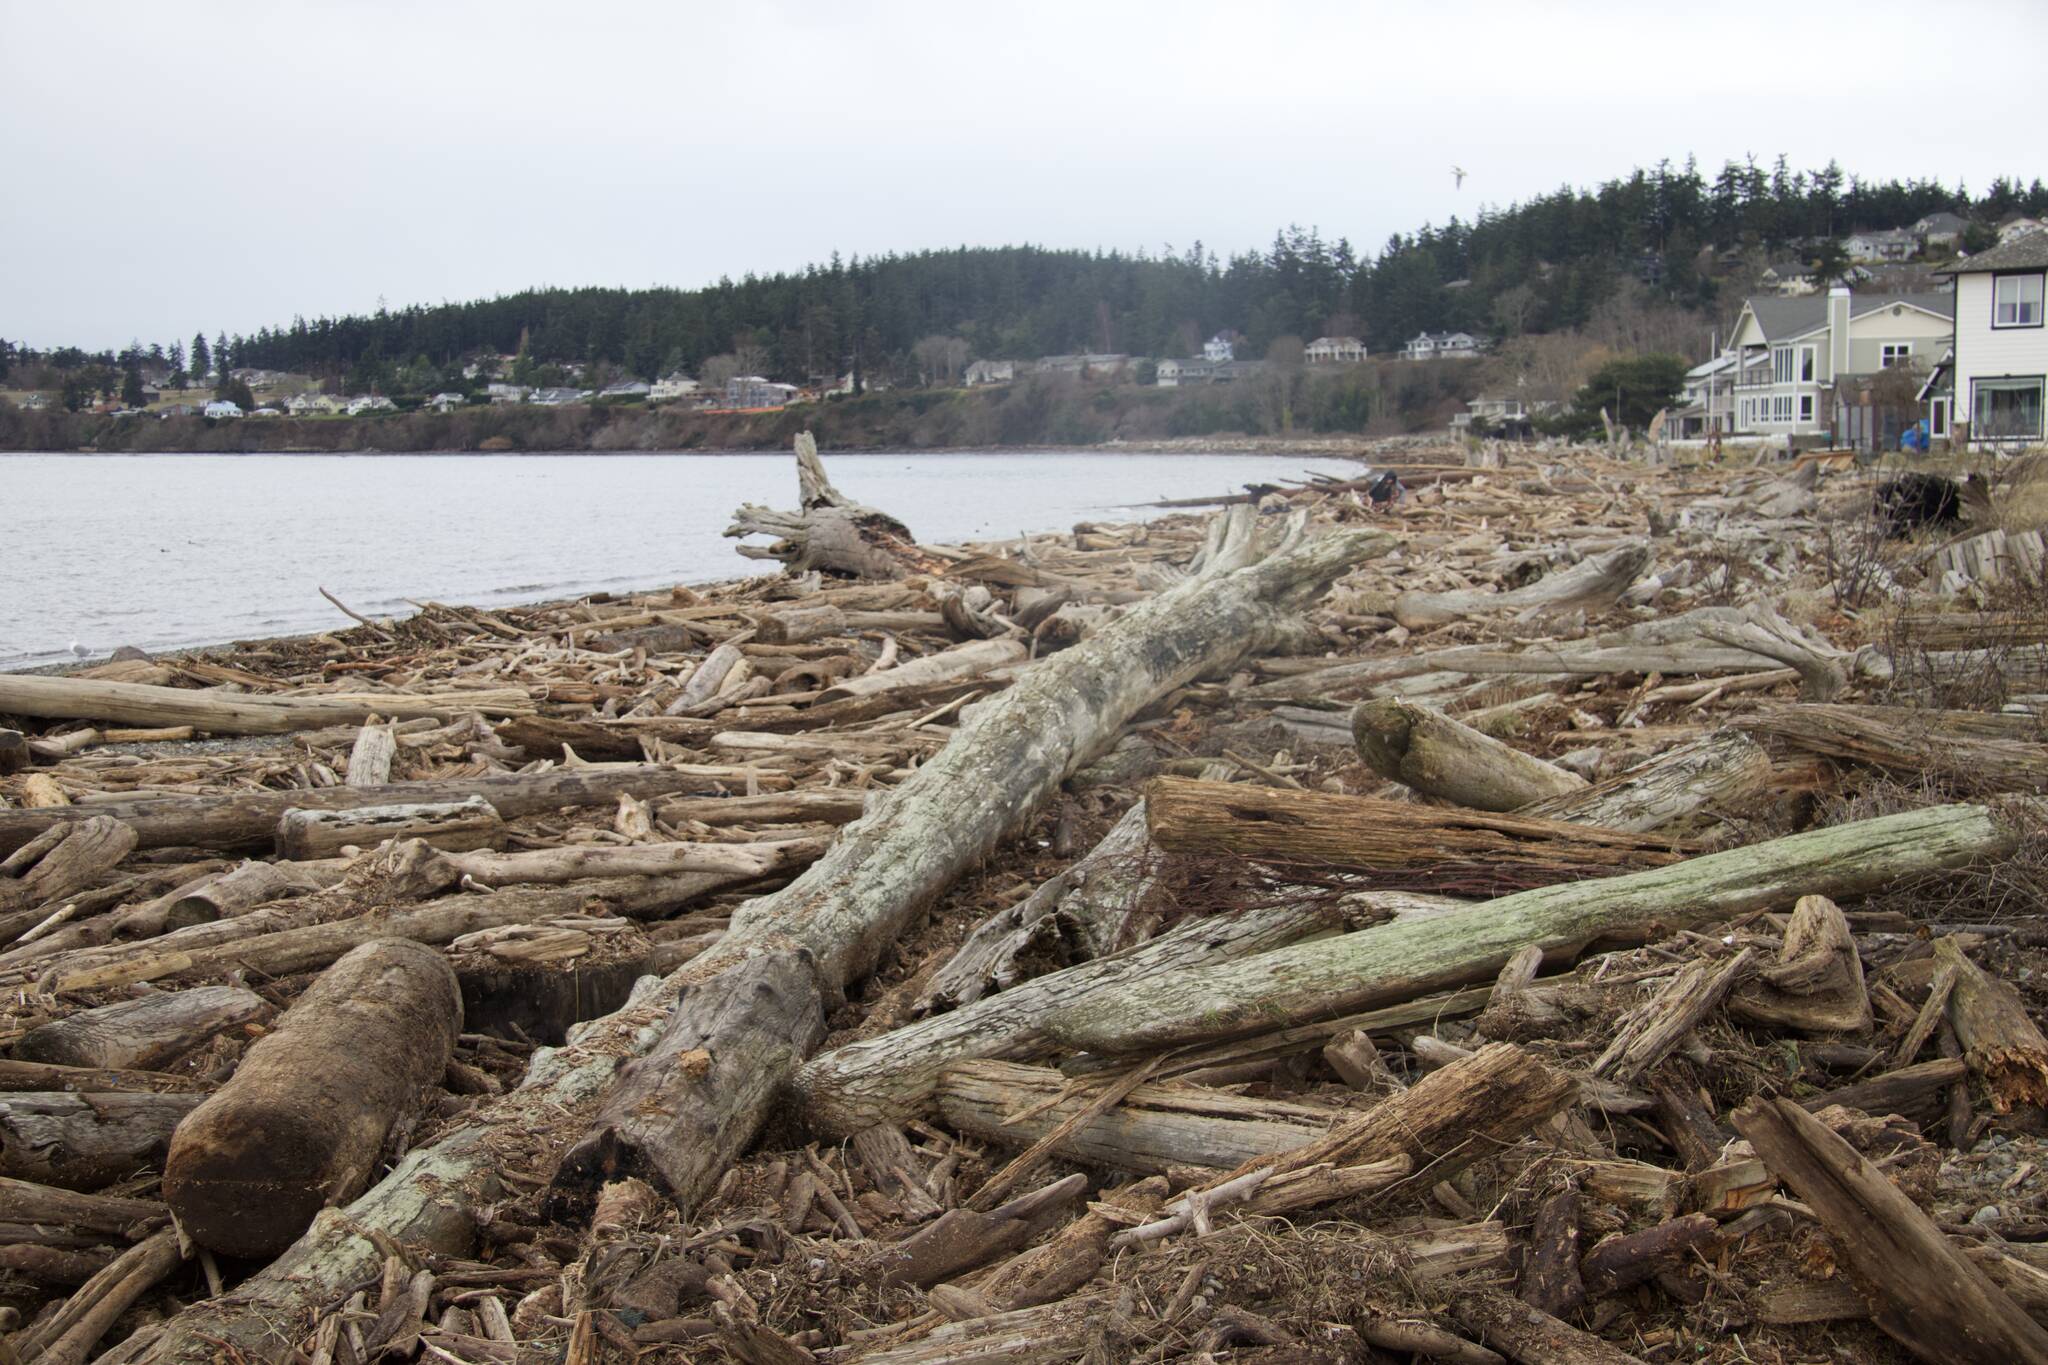 Photo by Rachel Rosen/Whidbey News-Times
An abundance of driftwood has washed up on the shore at Windjammer Park.